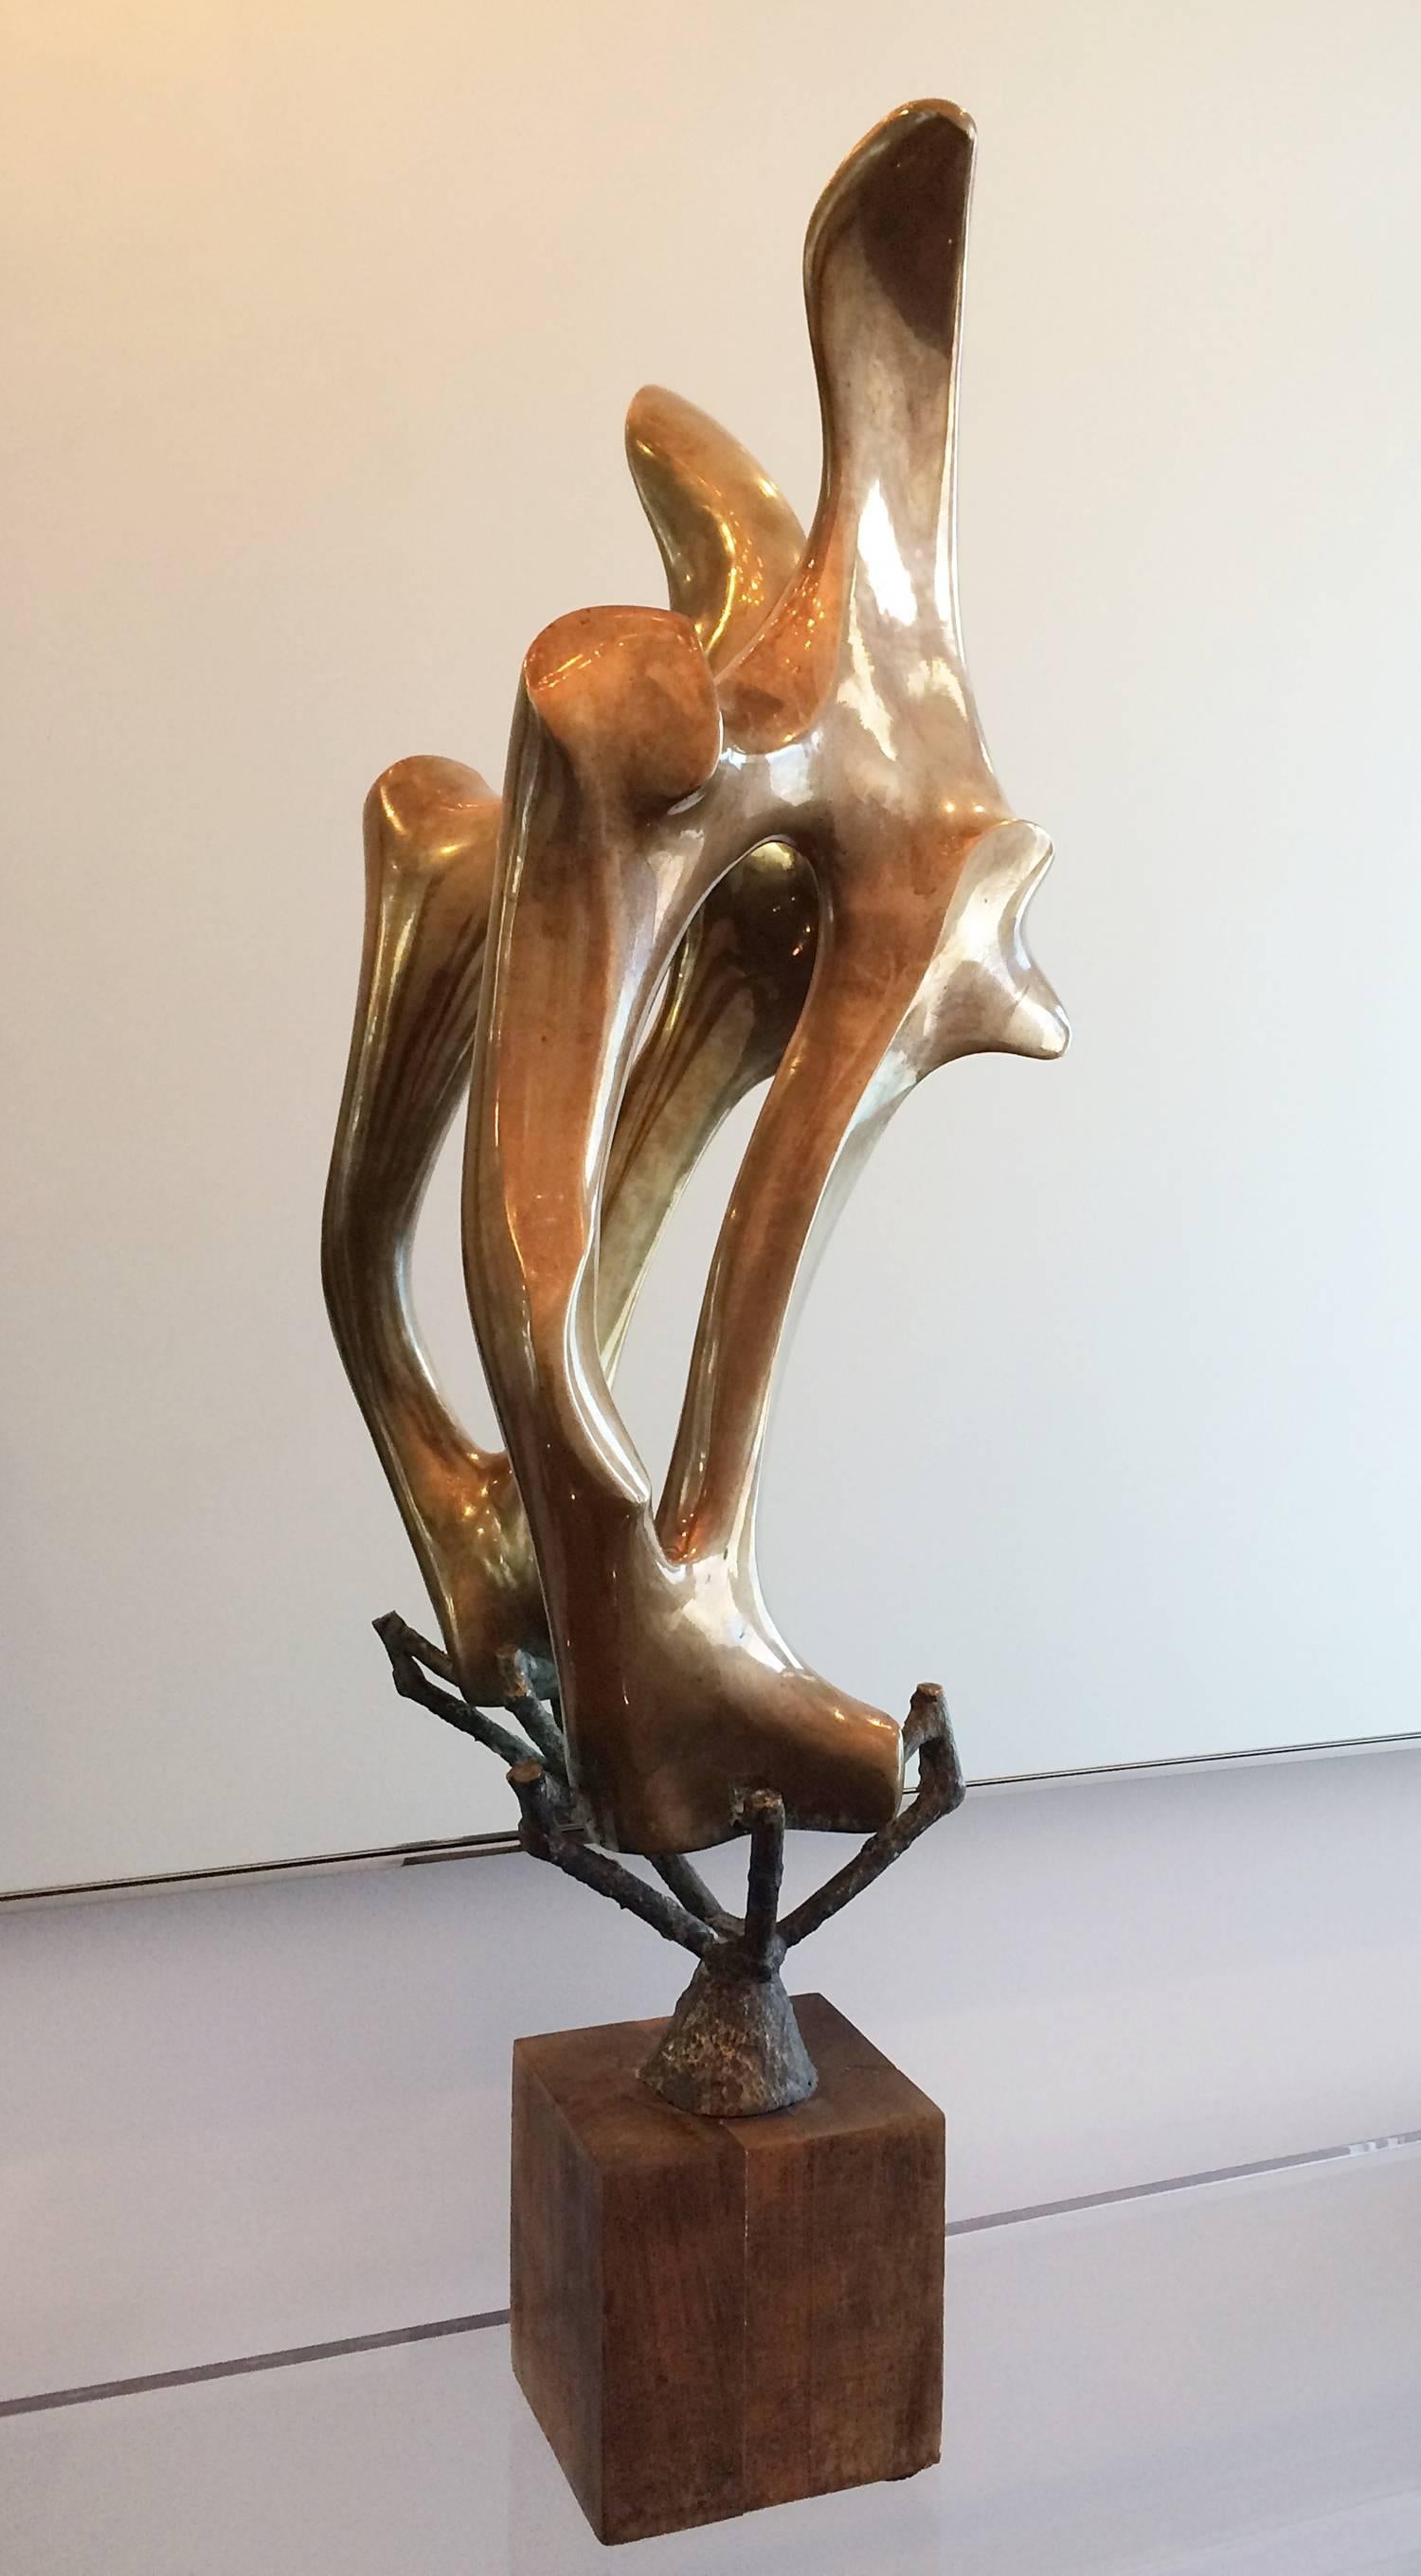 Fantastic abstract bronze sculpture be renown Italian sculptor Arturo Di Modica done in 1970.
The piece is in excellent condition, signed and dated by the artist.

The sculpture is standing in a branch like base protruding from a wooden